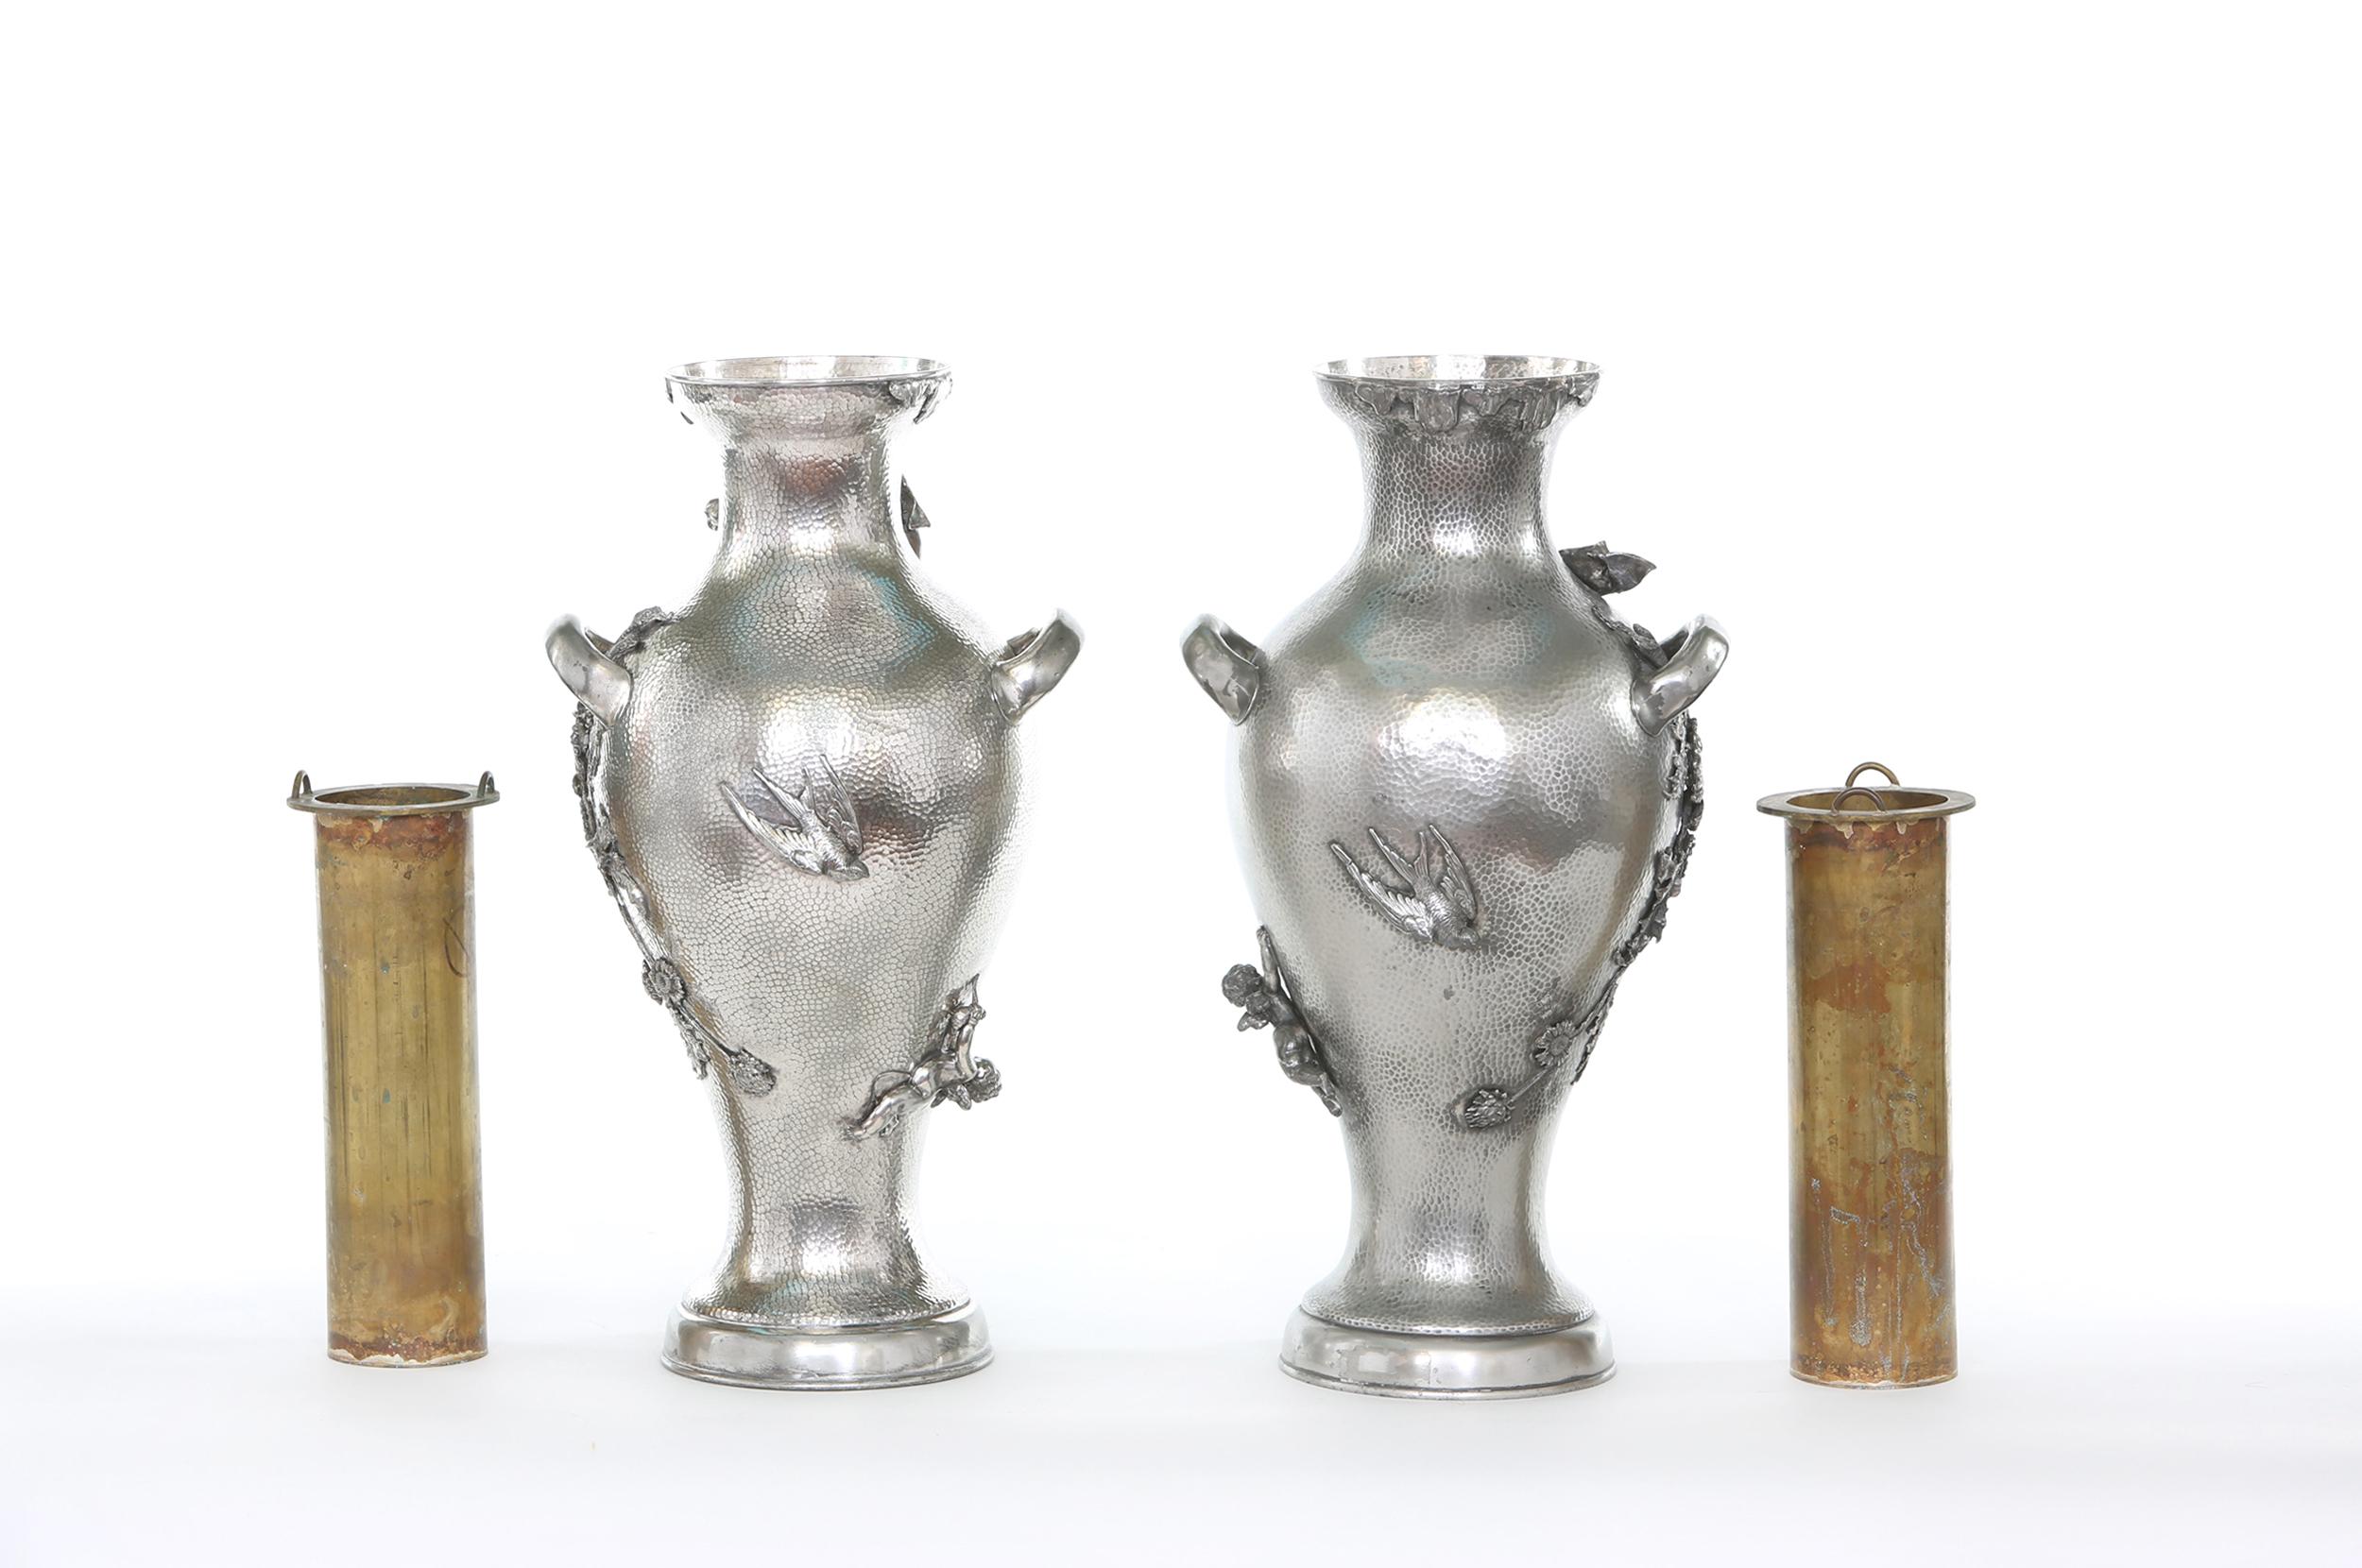 English Late 19th Century Silver Plated Pair of Vases / Urns For Sale